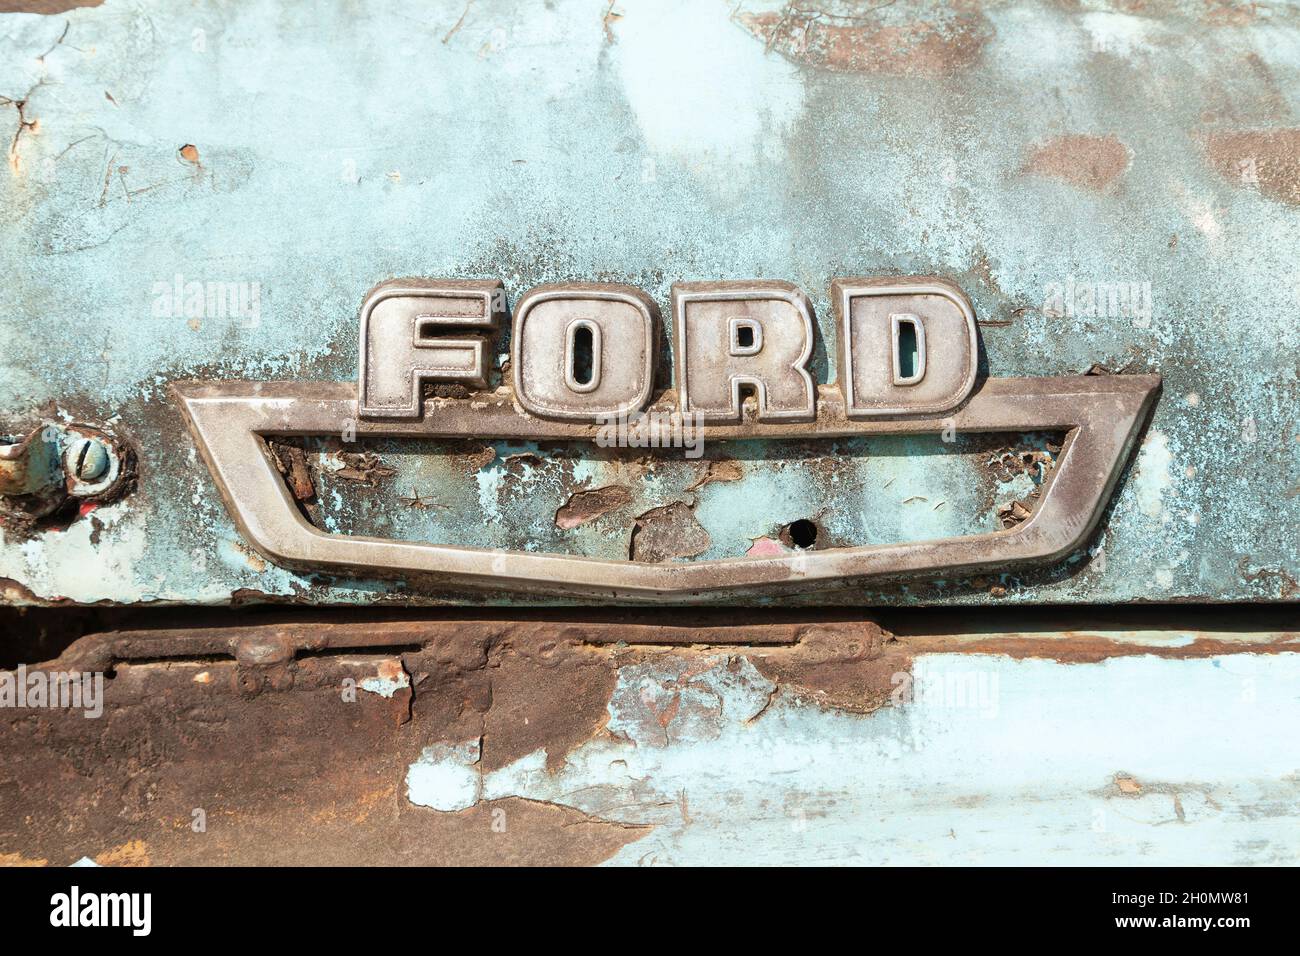 Pilcopata, Peru - April 12, 2014: Close-up logo of an old, rusty and abandoned Ford truck, in the surroundings of the small town of Pilcopata Stock Photo